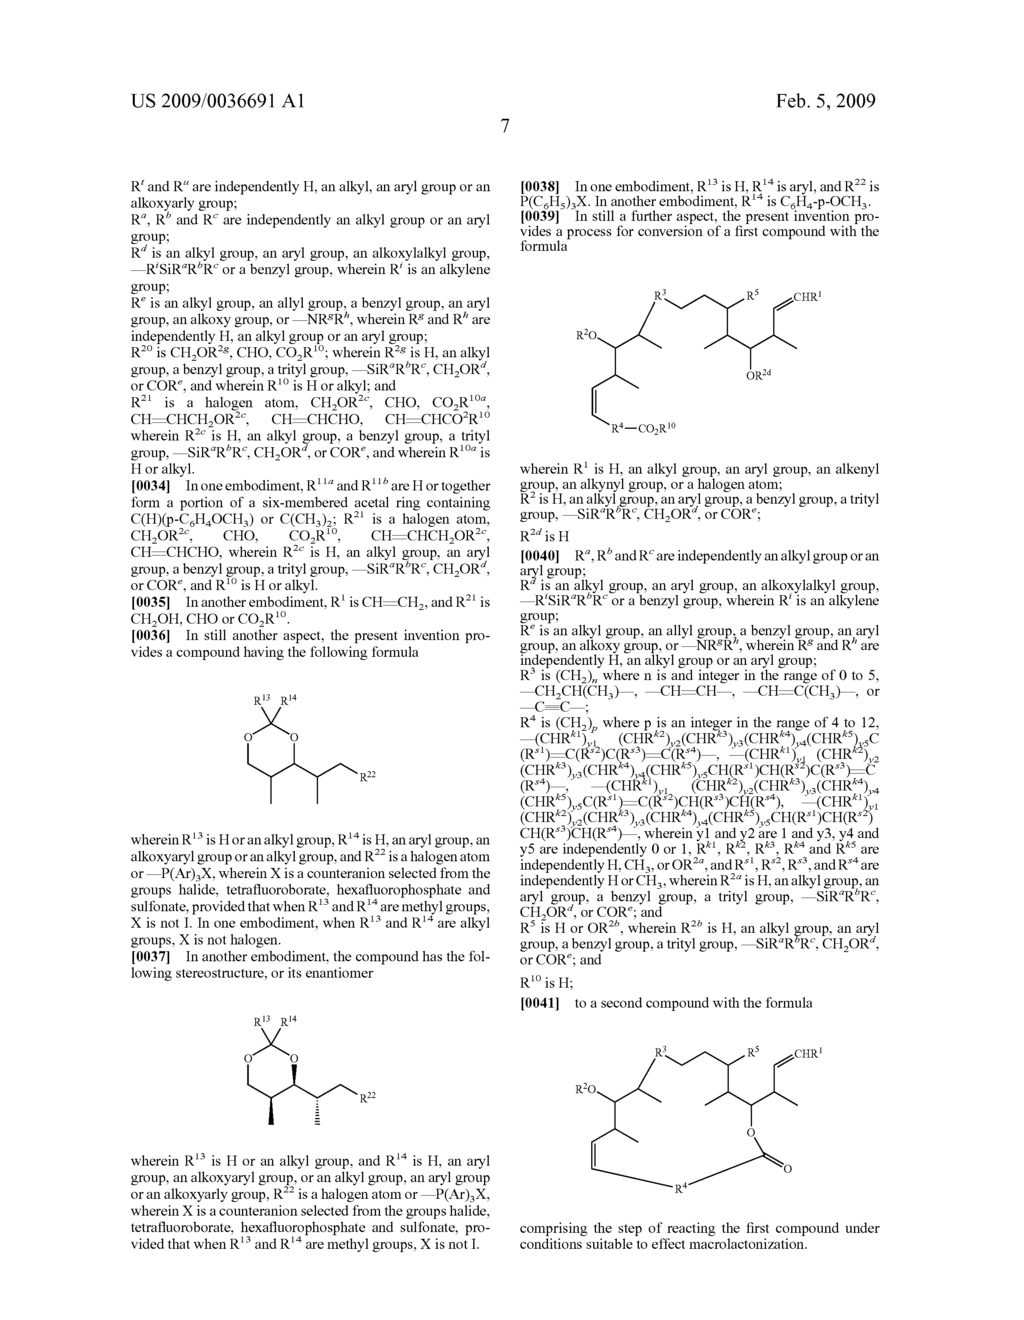 ANALOGS OF DICODERMOLIDE AND DICTYOSTATIN-1, INTERMEDIATES THEREFOR AND METHODS OF SYNTHESIS THEREOF - diagram, schematic, and image 30